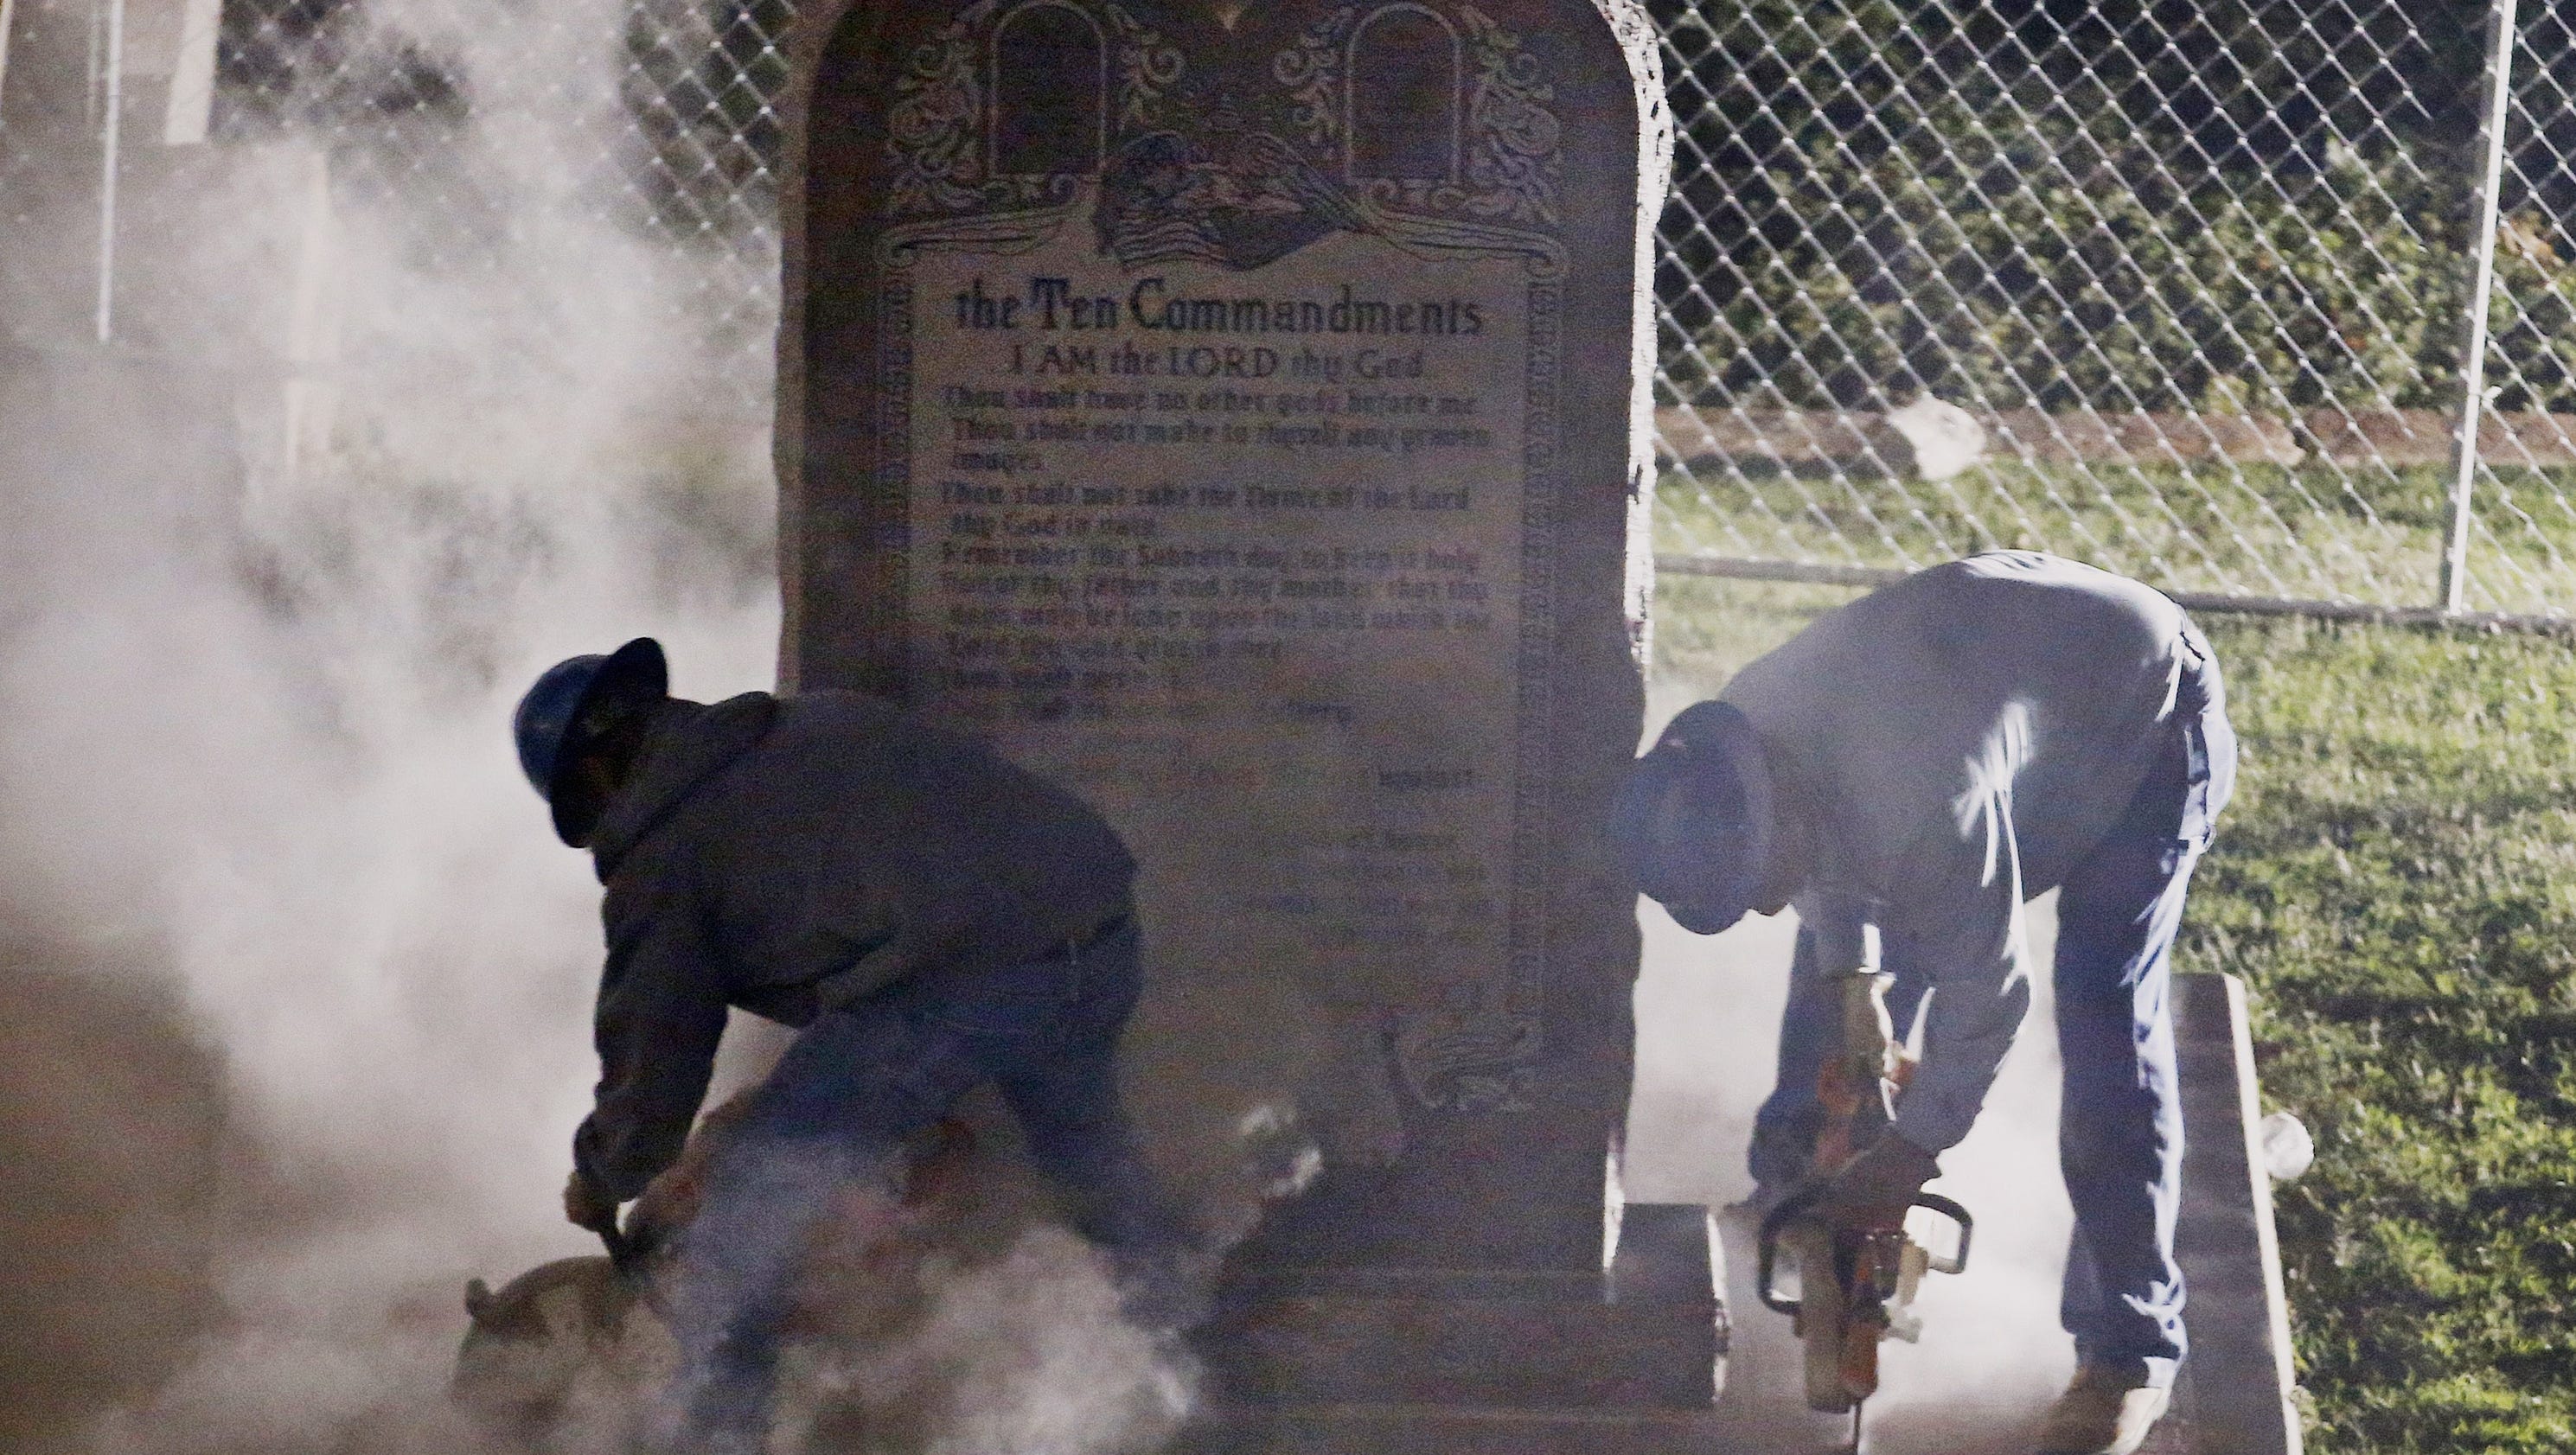 10 Commandments removed from Okla. Capitol